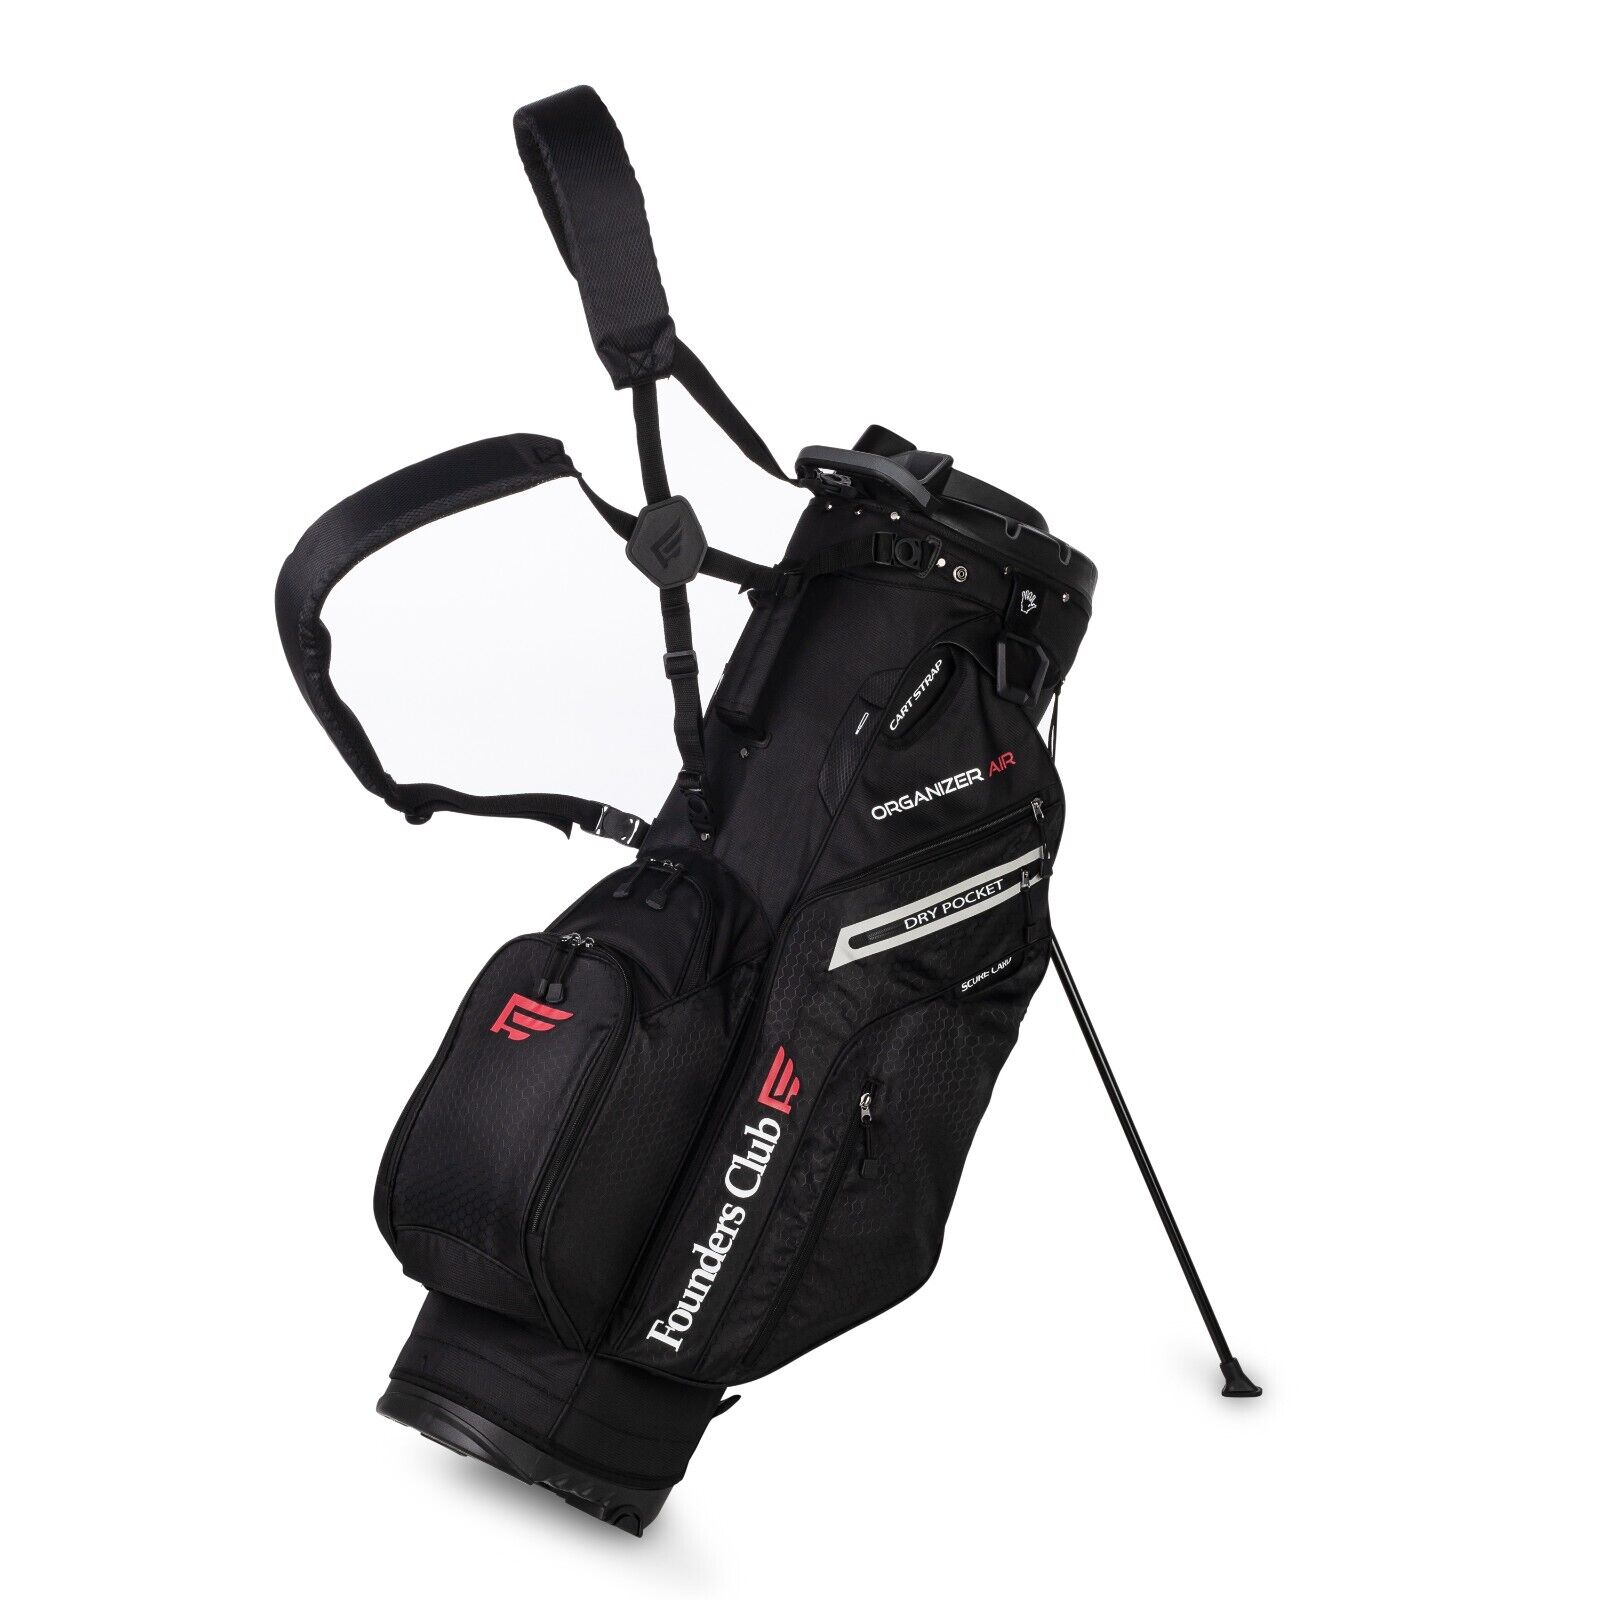 Founders Club Organizer Men's Golf Stand Bag with 14 Way full length divider